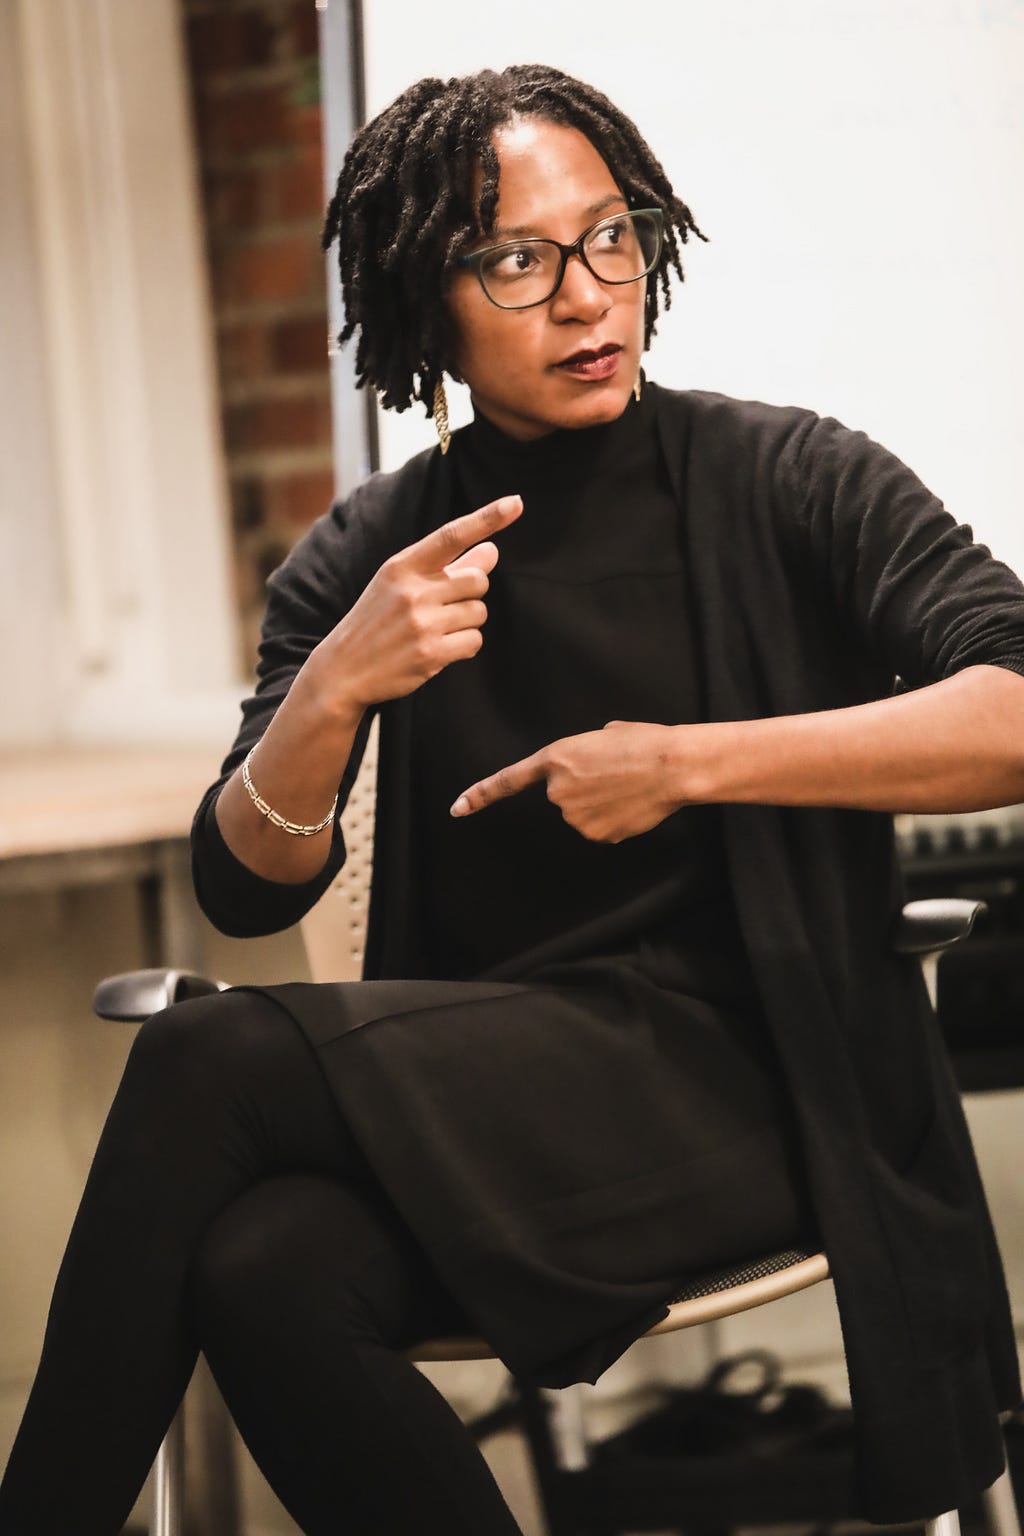 Lindsey (the article author) sits in a chair wearing a chic all-black outfit. Her index fingers point in opposite directions across her body as she wears a focused expression.